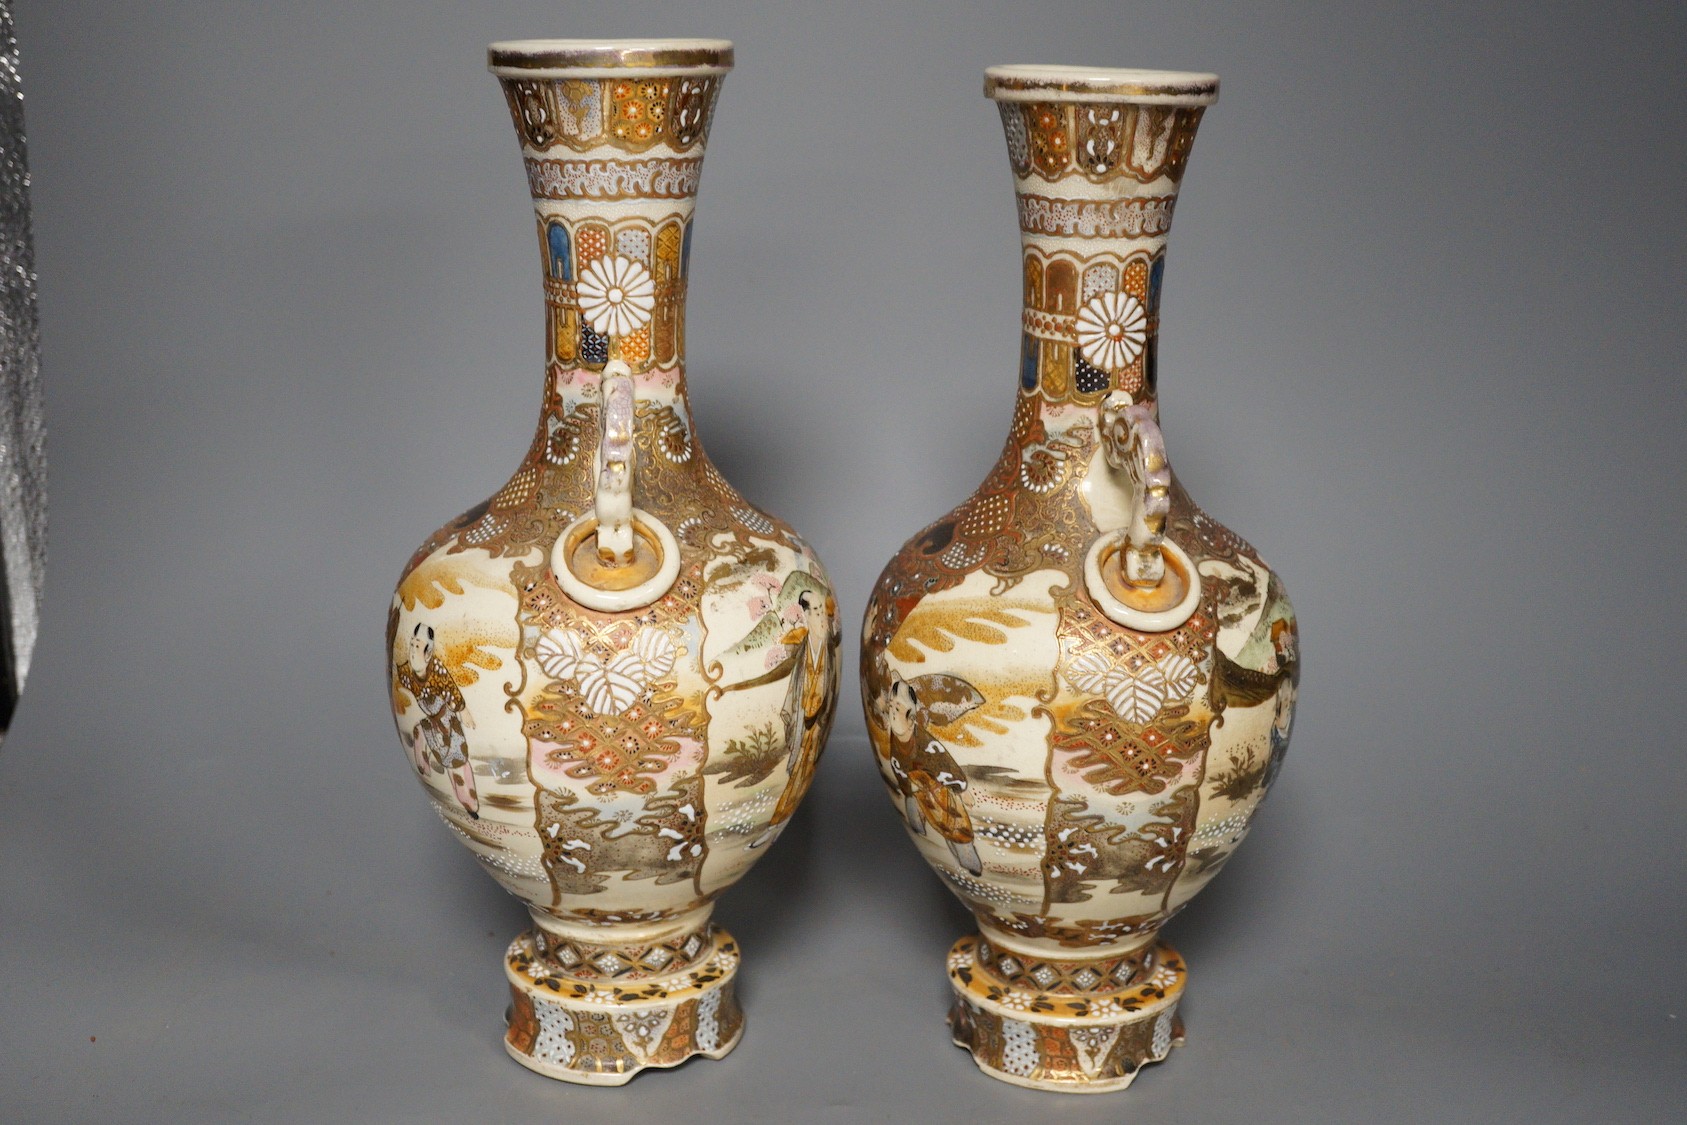 A pair of Japanese satsuma pottery vases, 30.5 cm high